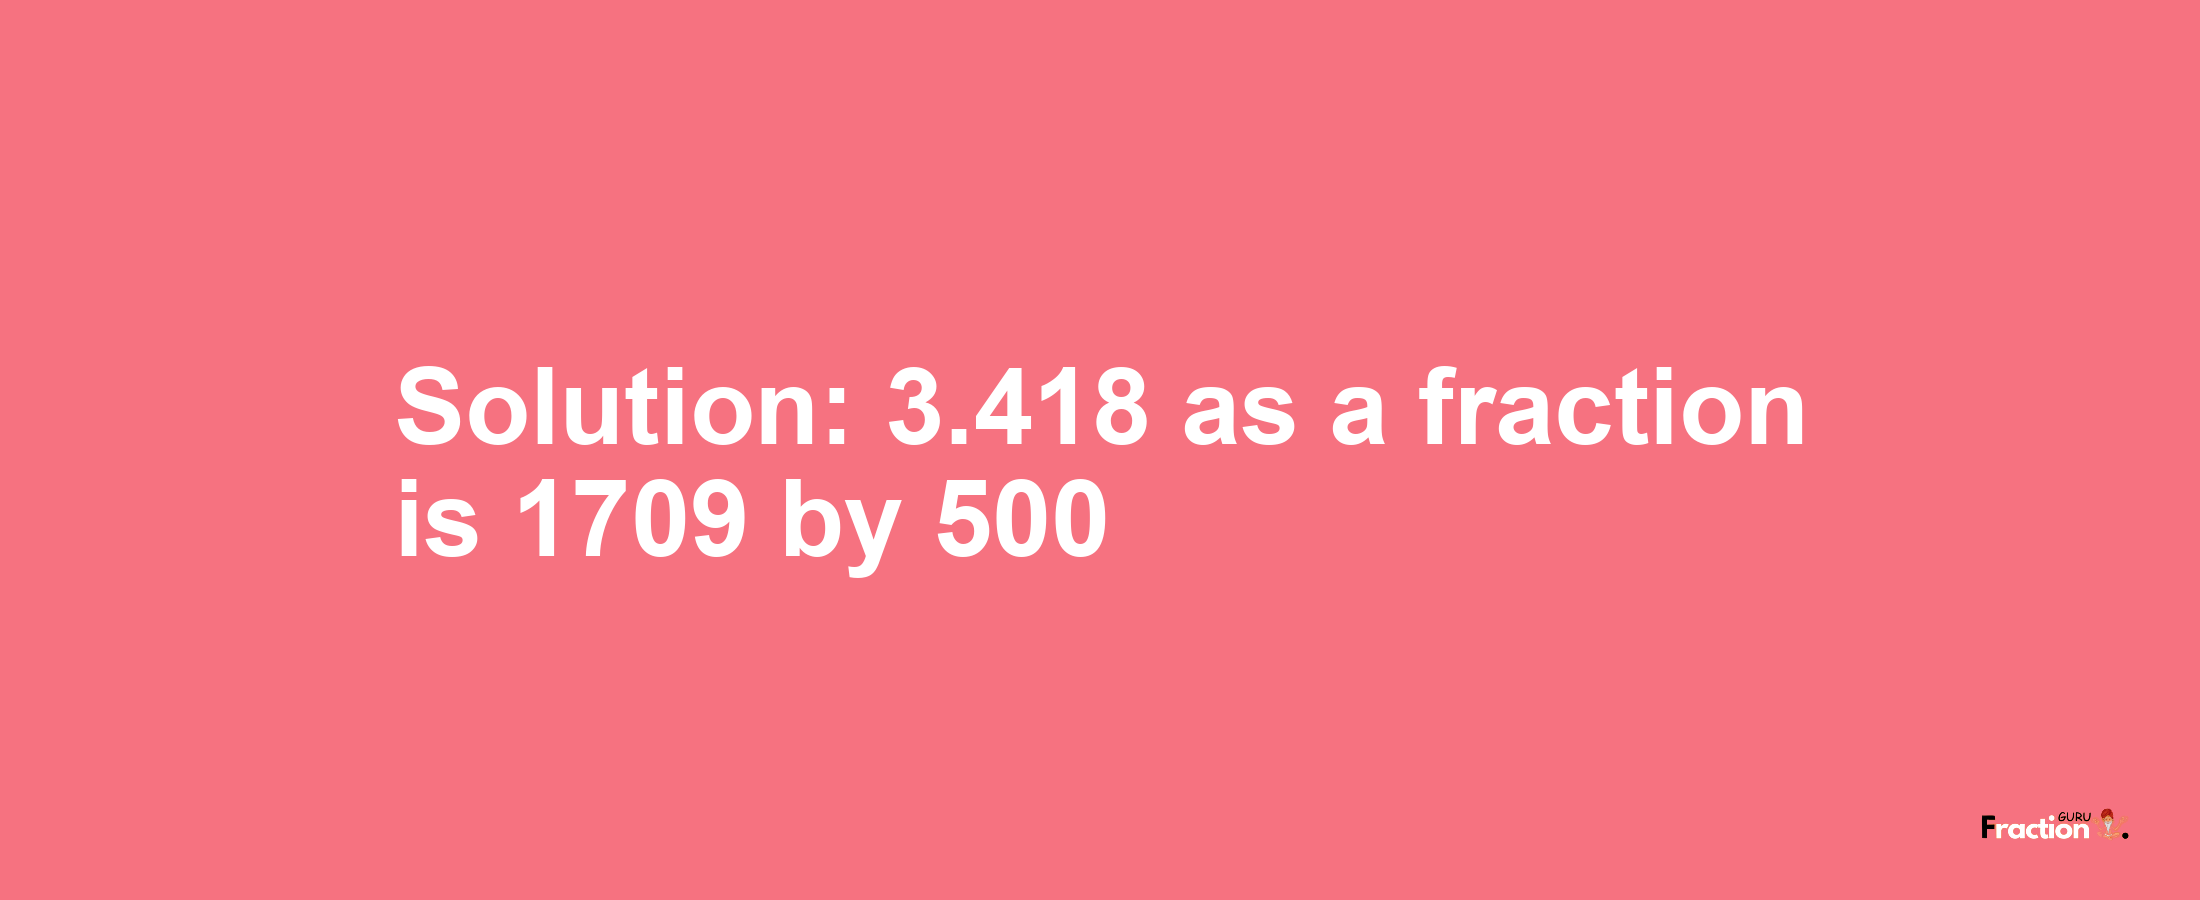 Solution:3.418 as a fraction is 1709/500